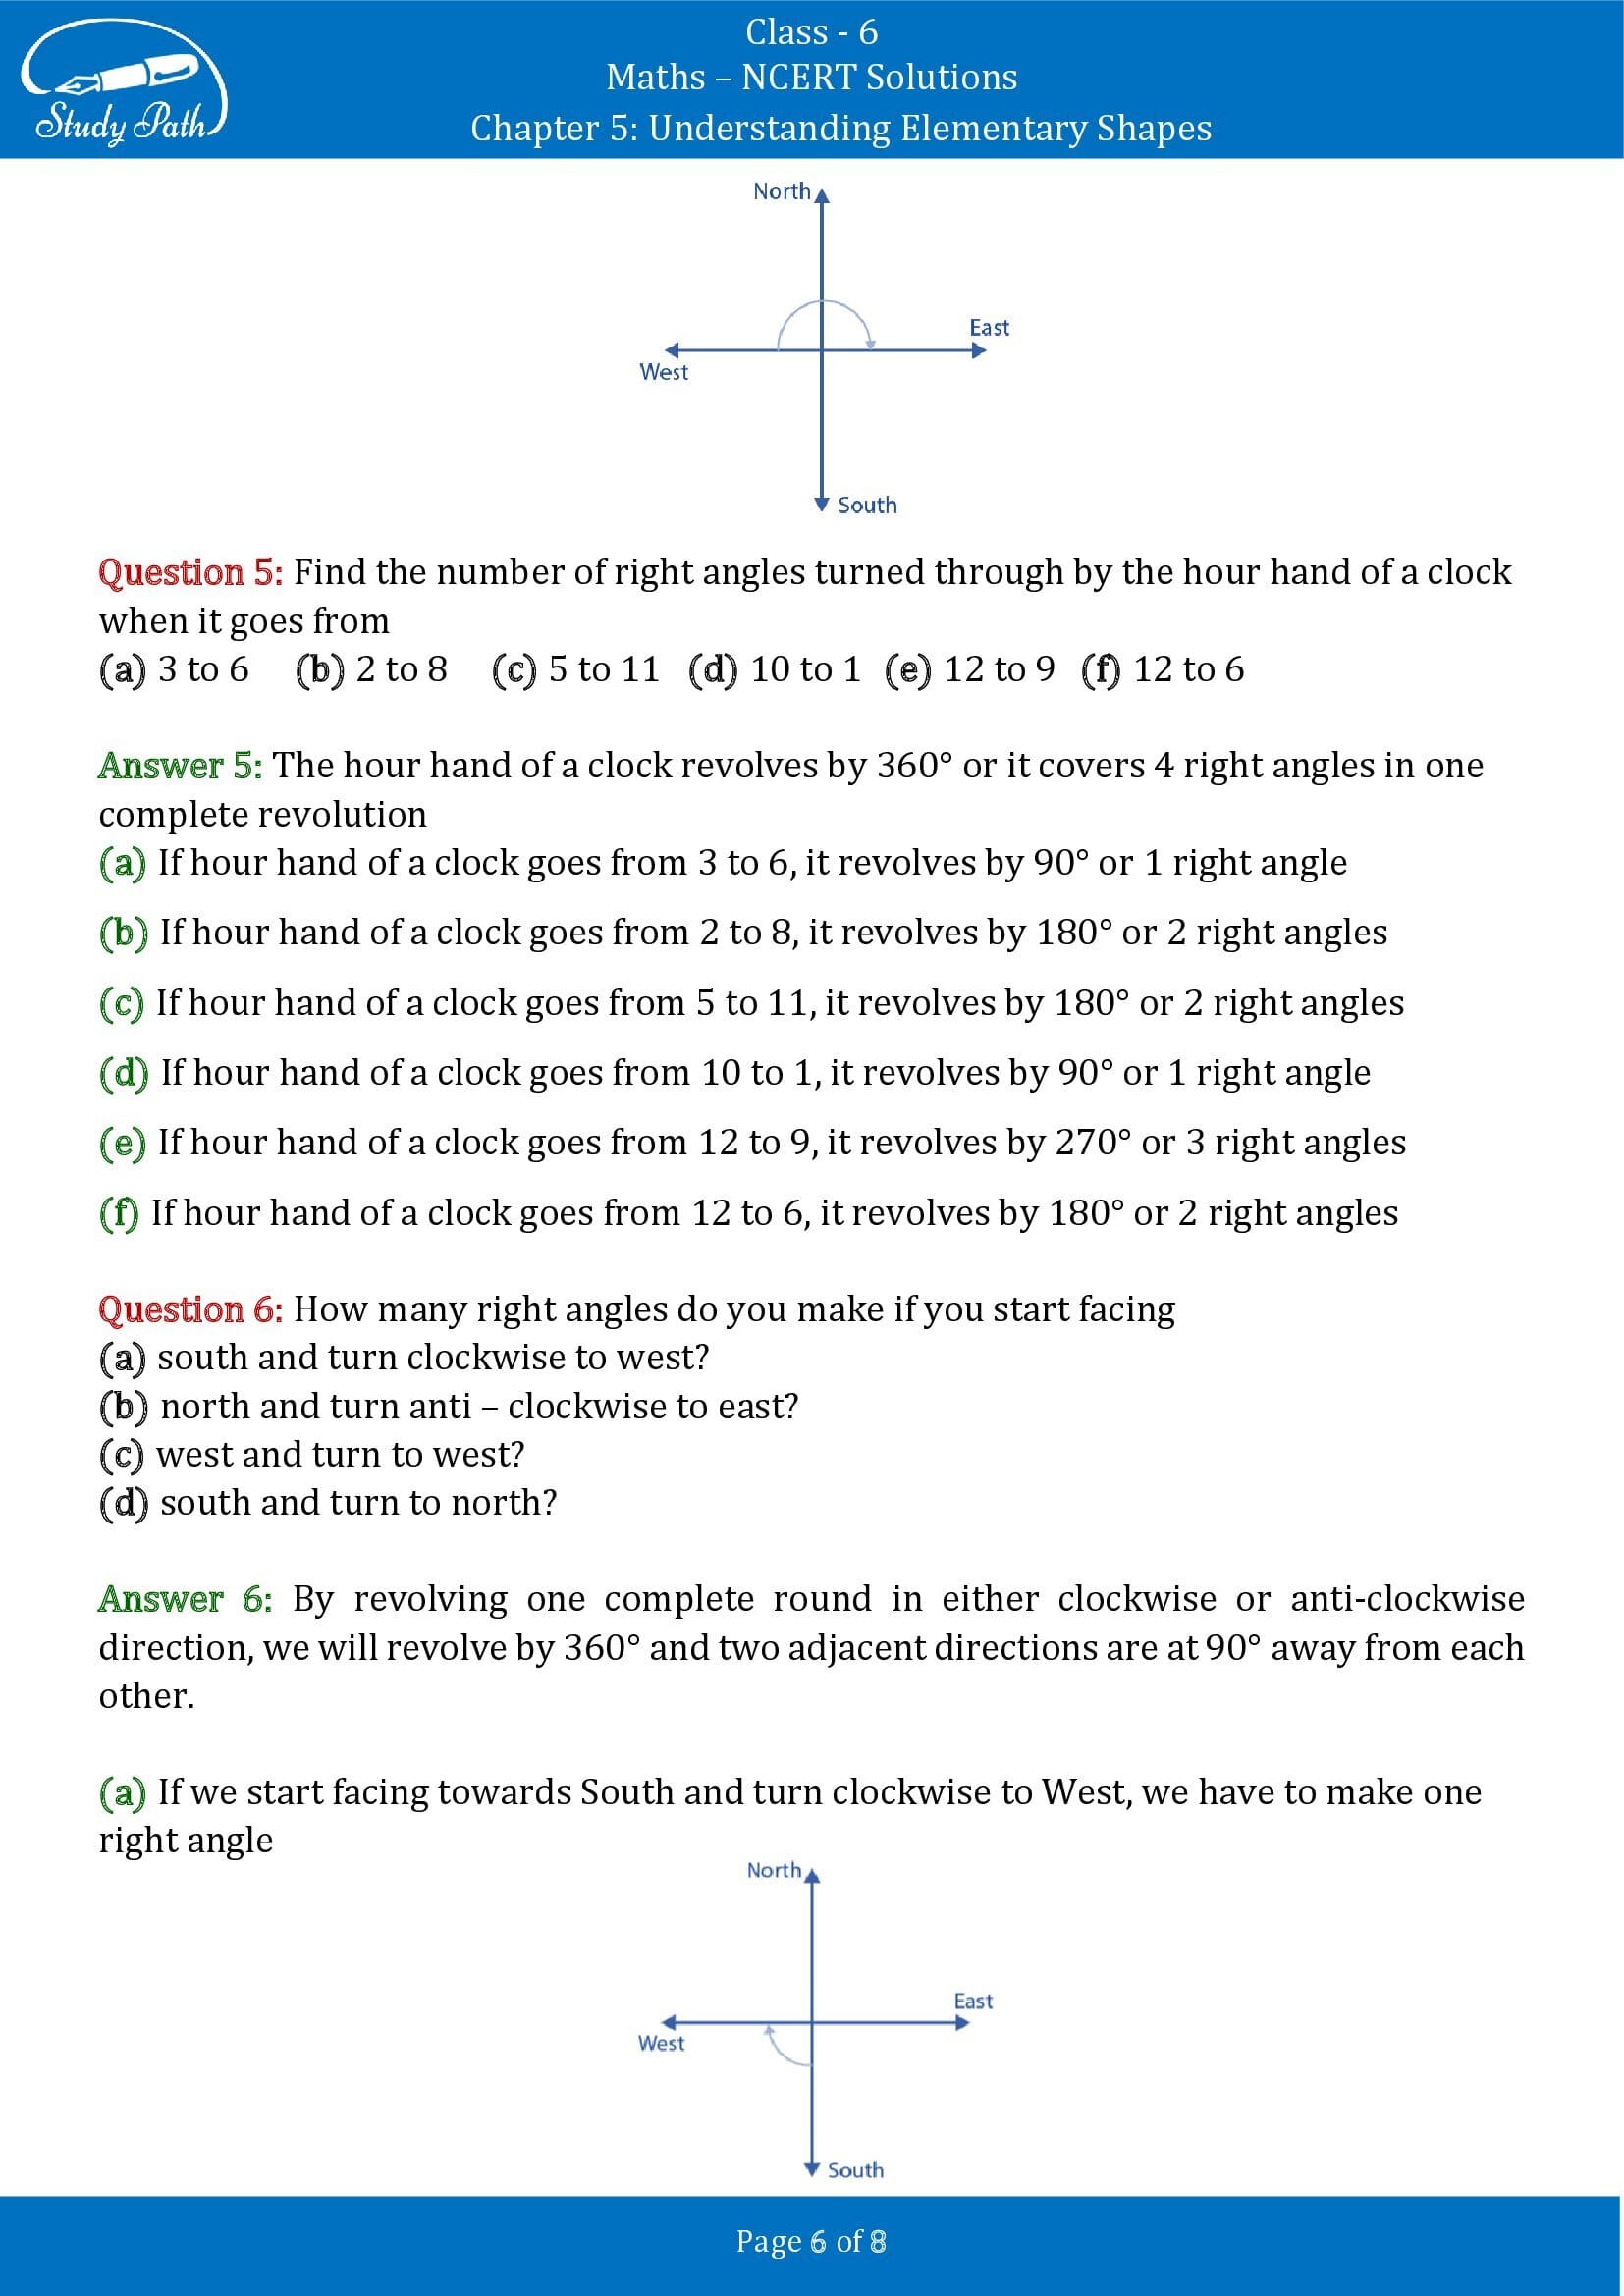 NCERT Solutions for Class 6 Maths Chapter 5 Understanding Elementary Shapes Exercise 5.2 00006